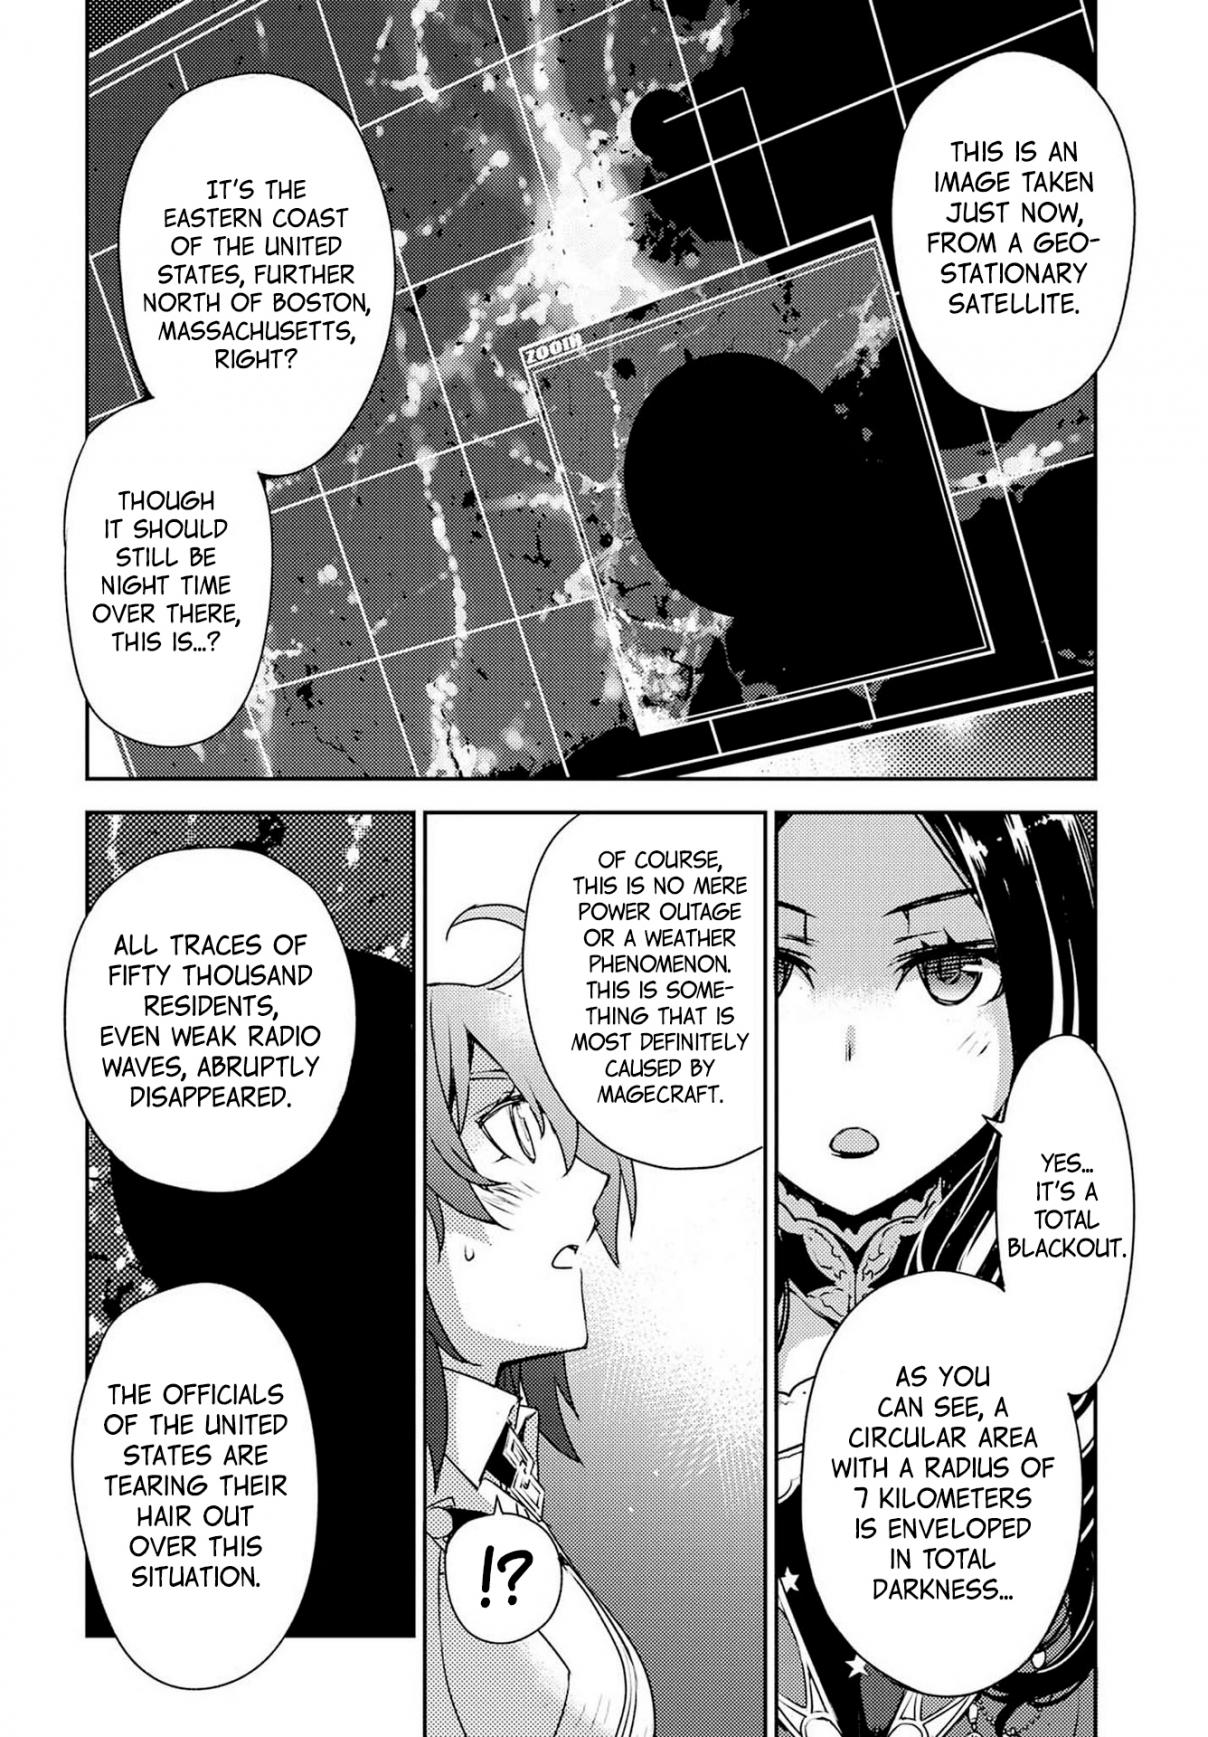 Fate/Grand Order: Epic of Remnant IV Salem of the Heresy Ch. 1 Prologue